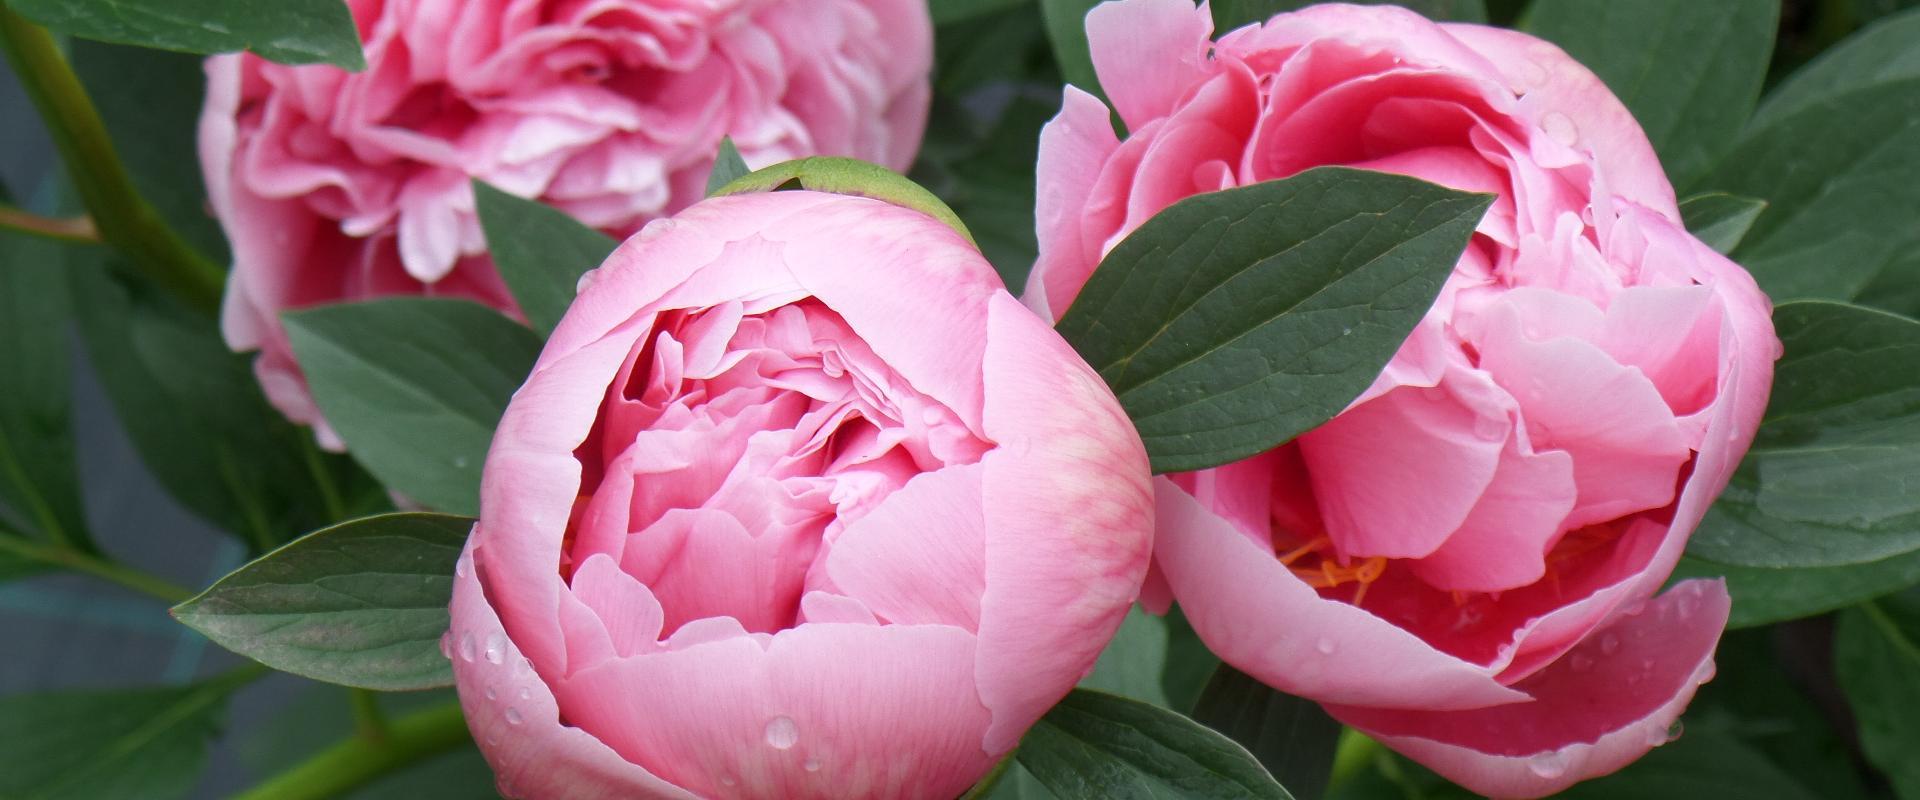 The Saaremaa Peony Festival is the best place for a family to spend some lovely time together in fresh air. Thousands of peonies bloom from mid-May to